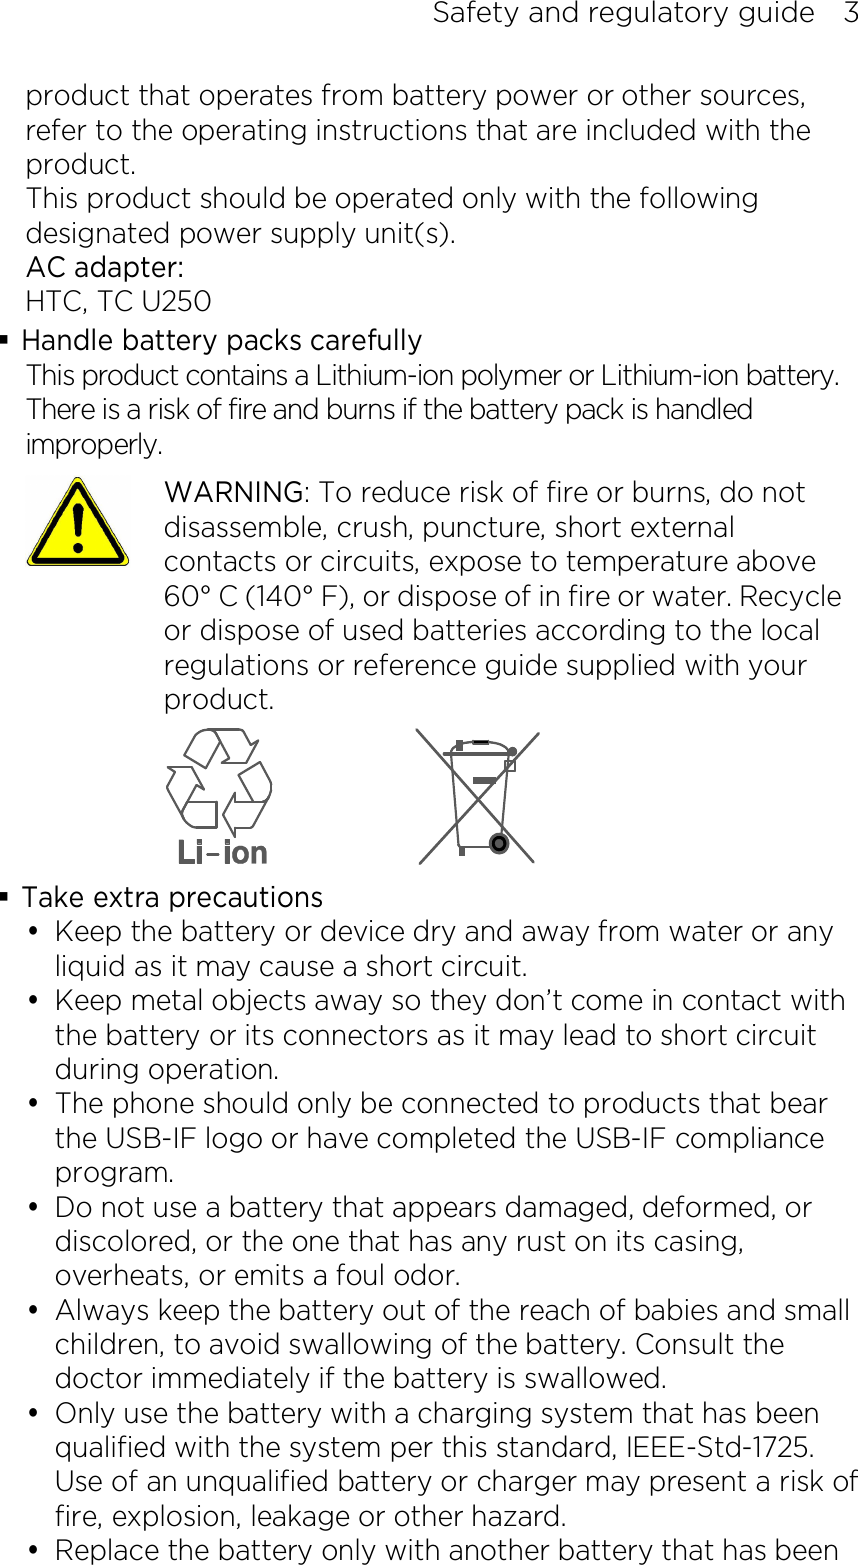 Safety and regulatory guide    3 product that operates from battery power or other sources, refer to the operating instructions that are included with the product. This product should be operated only with the following designated power supply unit(s). AC adapter: HTC, TC U250  Handle battery packs carefully This product contains a Lithium-ion polymer or Lithium-ion battery. There is a risk of fire and burns if the battery pack is handled improperly.    WARNING: To reduce risk of fire or burns, do not disassemble, crush, puncture, short external contacts or circuits, expose to temperature above 60° C (140° F), or dispose of in fire or water. Recycle or dispose of used batteries according to the local regulations or reference guide supplied with your product.   Take extra precautions  Keep the battery or device dry and away from water or any liquid as it may cause a short circuit.    Keep metal objects away so they don’t come in contact with the battery or its connectors as it may lead to short circuit during operation.  The phone should only be connected to products that bear the USB-IF logo or have completed the USB-IF compliance program.  Do not use a battery that appears damaged, deformed, or discolored, or the one that has any rust on its casing, overheats, or emits a foul odor.  Always keep the battery out of the reach of babies and small children, to avoid swallowing of the battery. Consult the doctor immediately if the battery is swallowed.  Only use the battery with a charging system that has been qualified with the system per this standard, IEEE-Std-1725. Use of an unqualified battery or charger may present a risk of fire, explosion, leakage or other hazard.  Replace the battery only with another battery that has been 